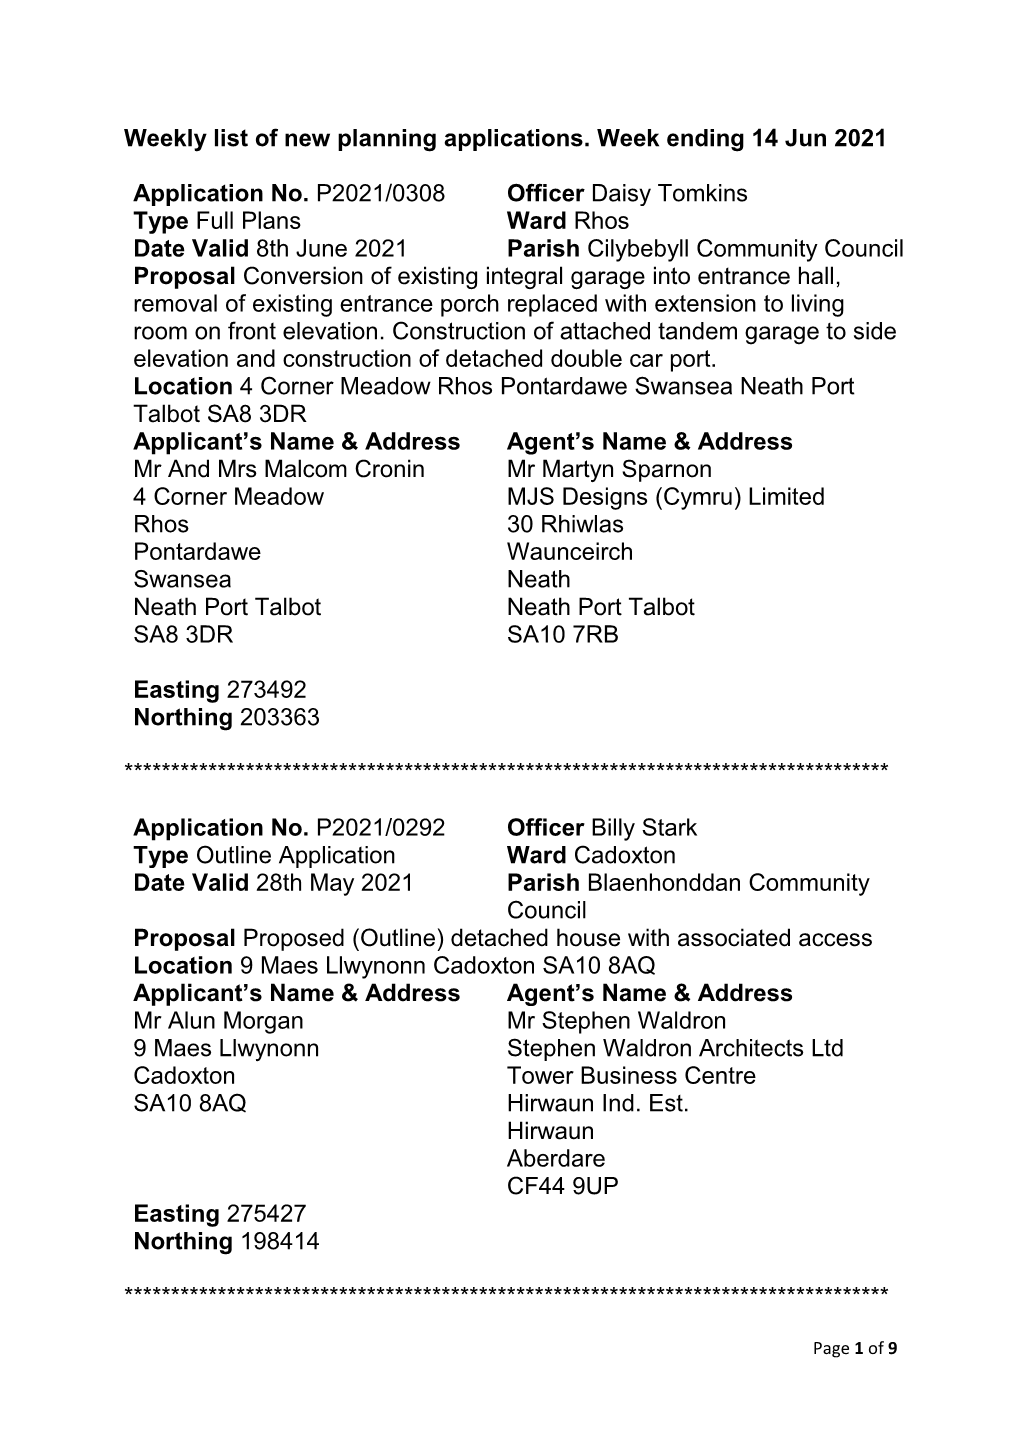 Weekly List of New Planning Applications. Week Ending 14 Jun 2021 Application No. P2021/0308 Officer Daisy Tomkins Type Full